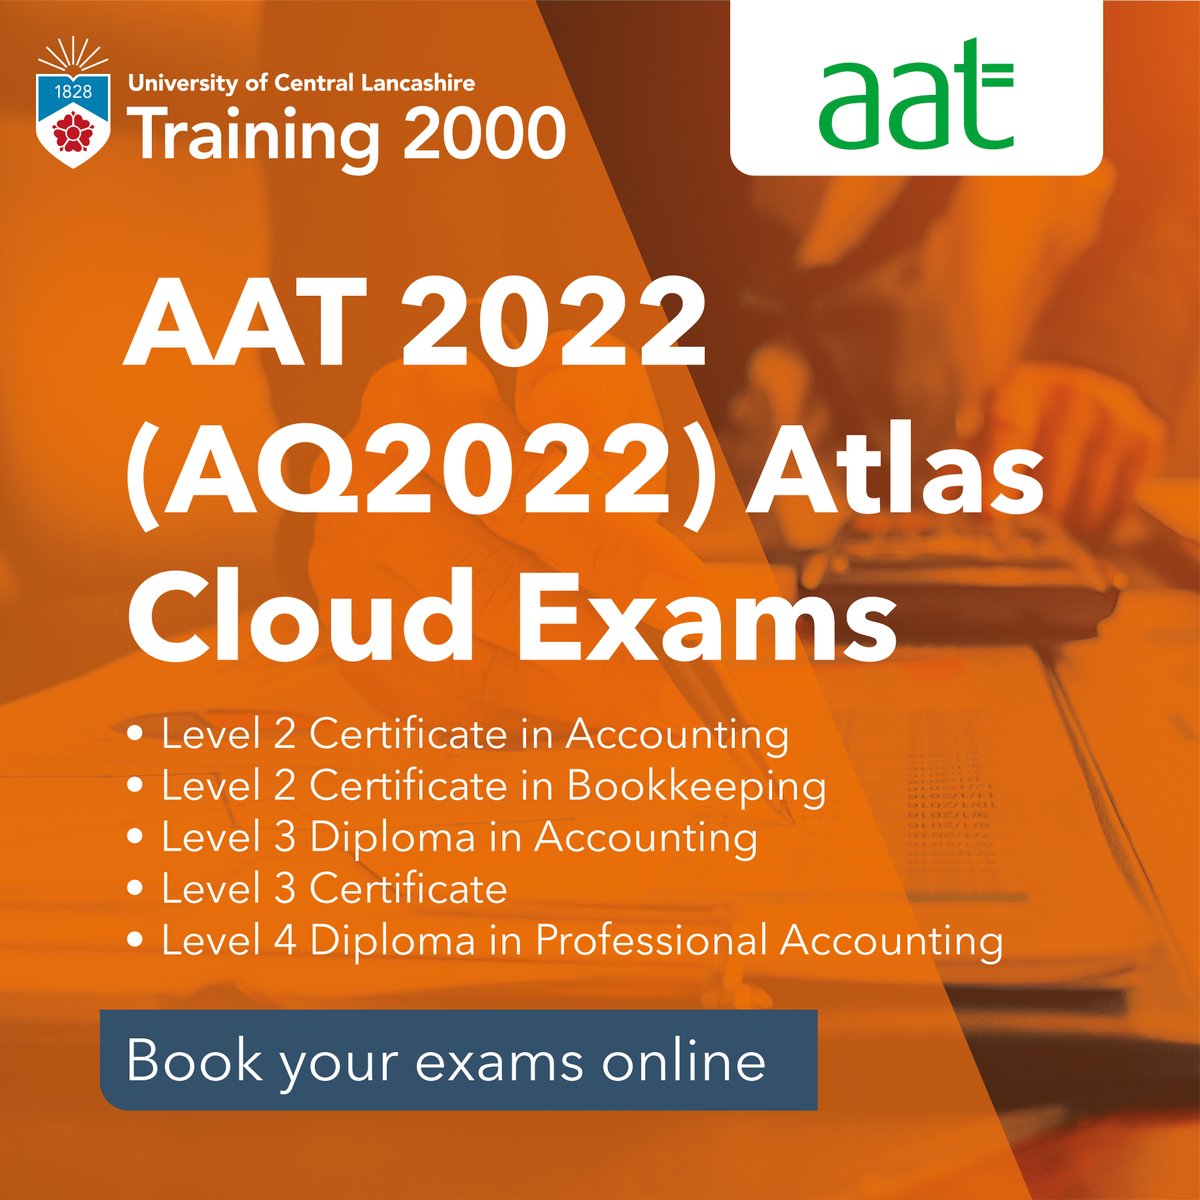 Did you know that Training 2000 are a Registered @YourAAT Test Centre? With upcoming dates available in June and July, you can book available slots and book here ➡ onlineshop.uclan.ac.uk/short-courses/… #AAT #Assessmentcentre